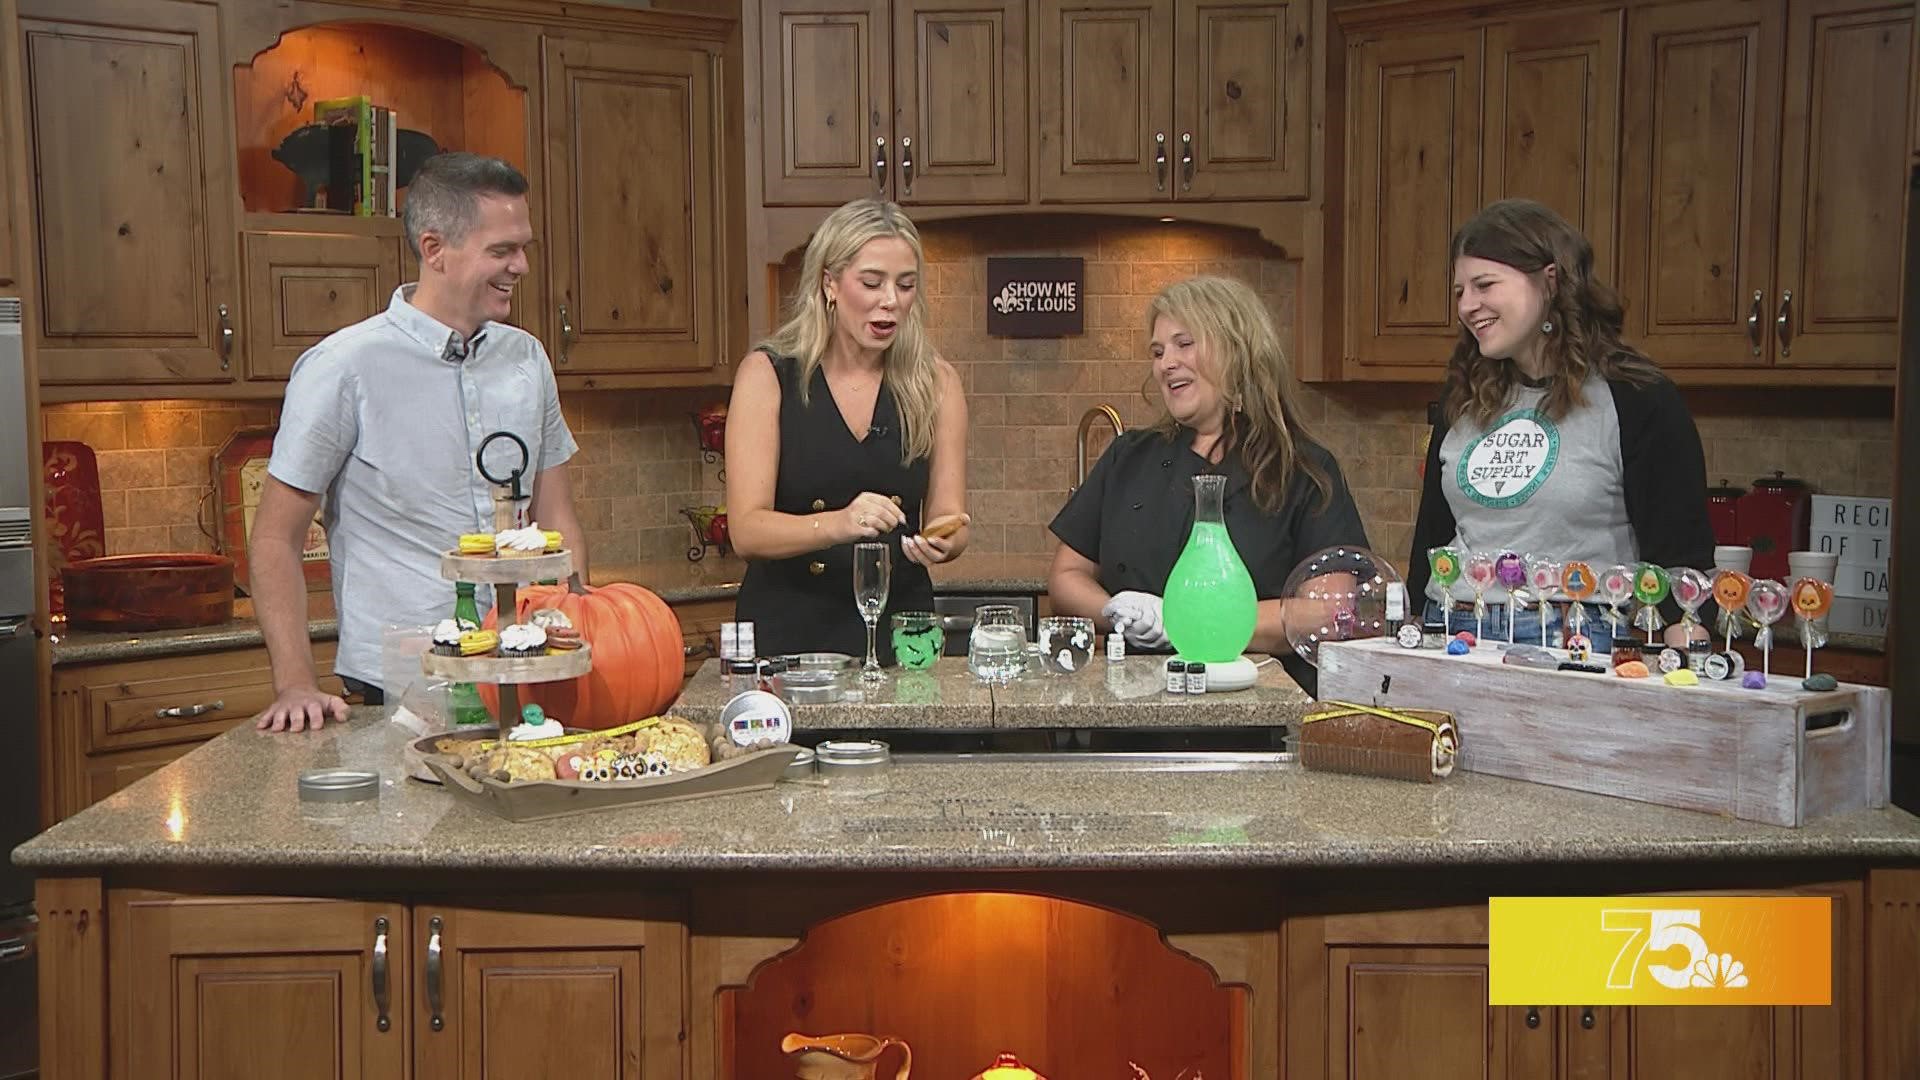 Dusty from 93.7 The Bull joins Mary and the Sugar Art Supply team to try their sugary and spooky sweets.